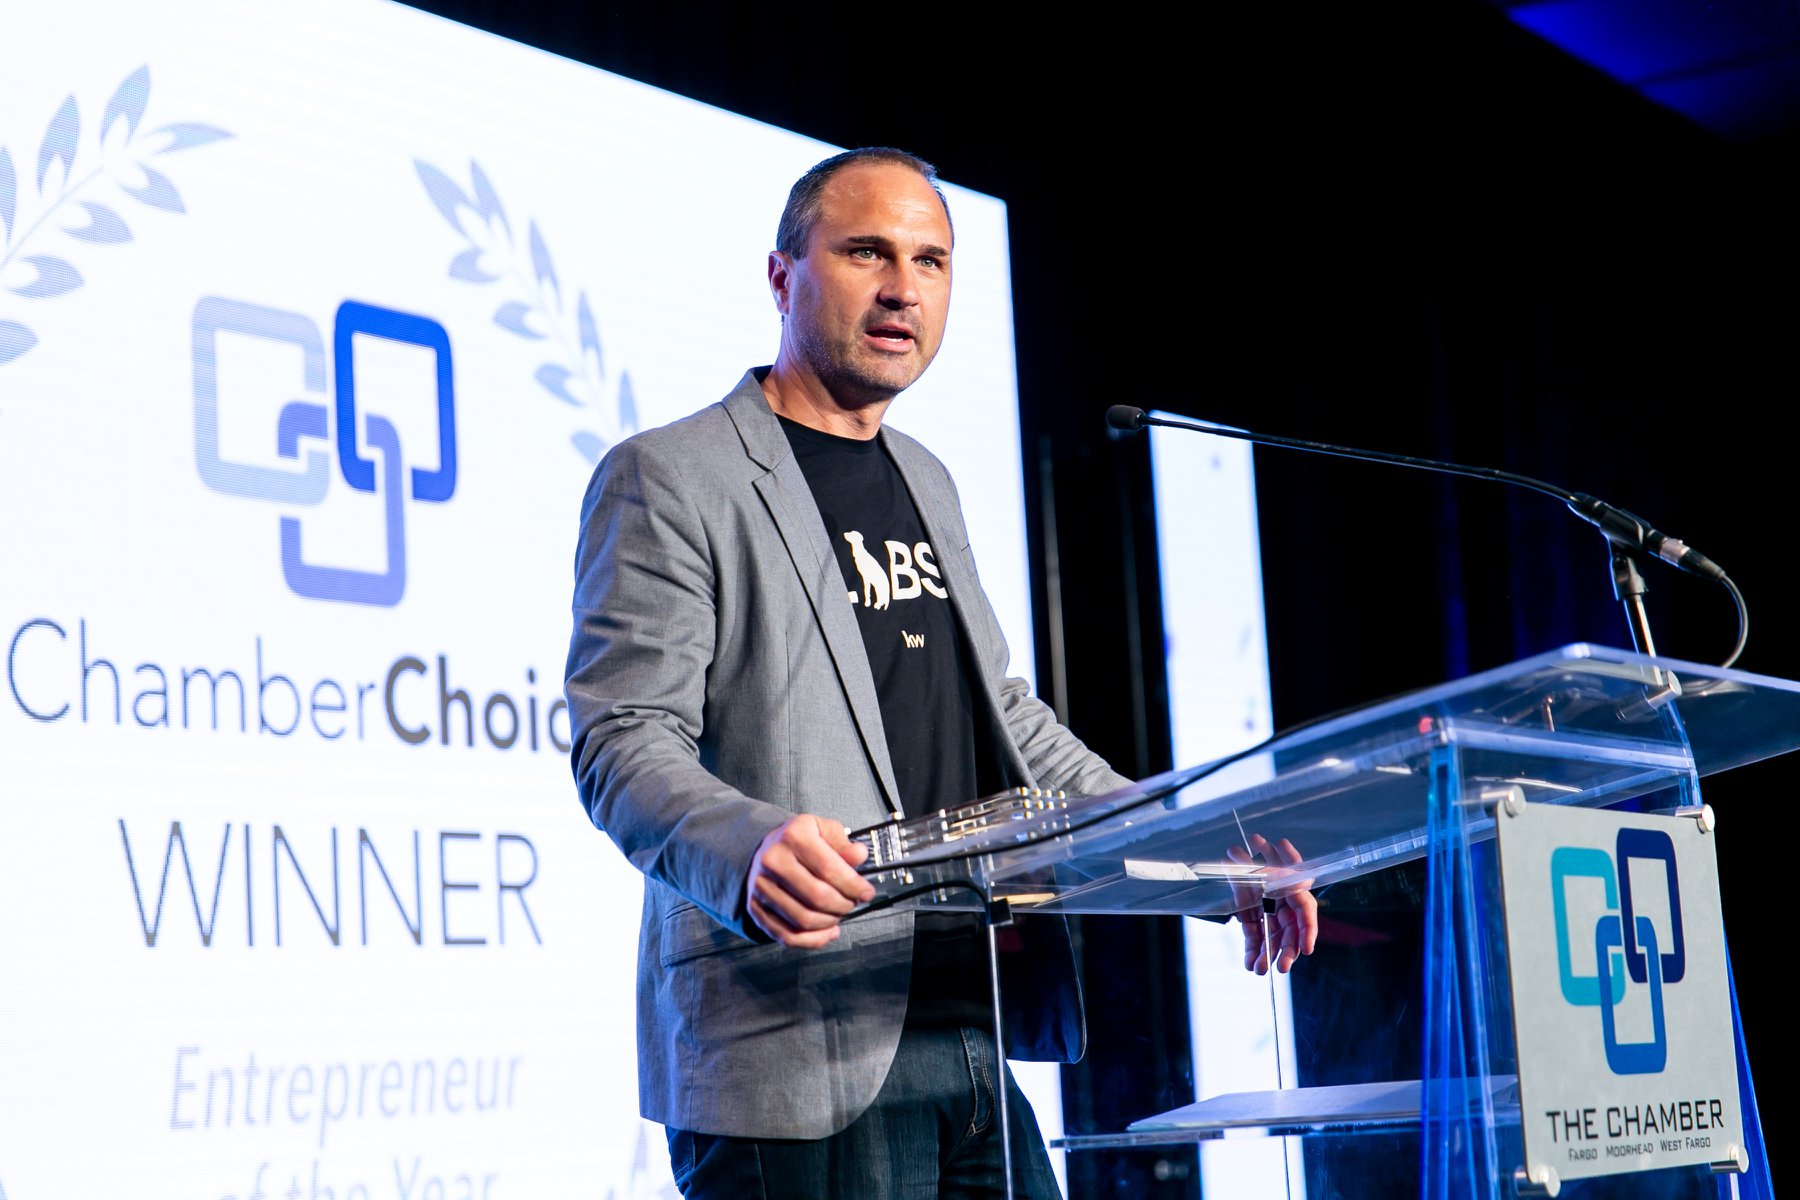 Image for Entrepreneur of the Year: Jeff Shipley